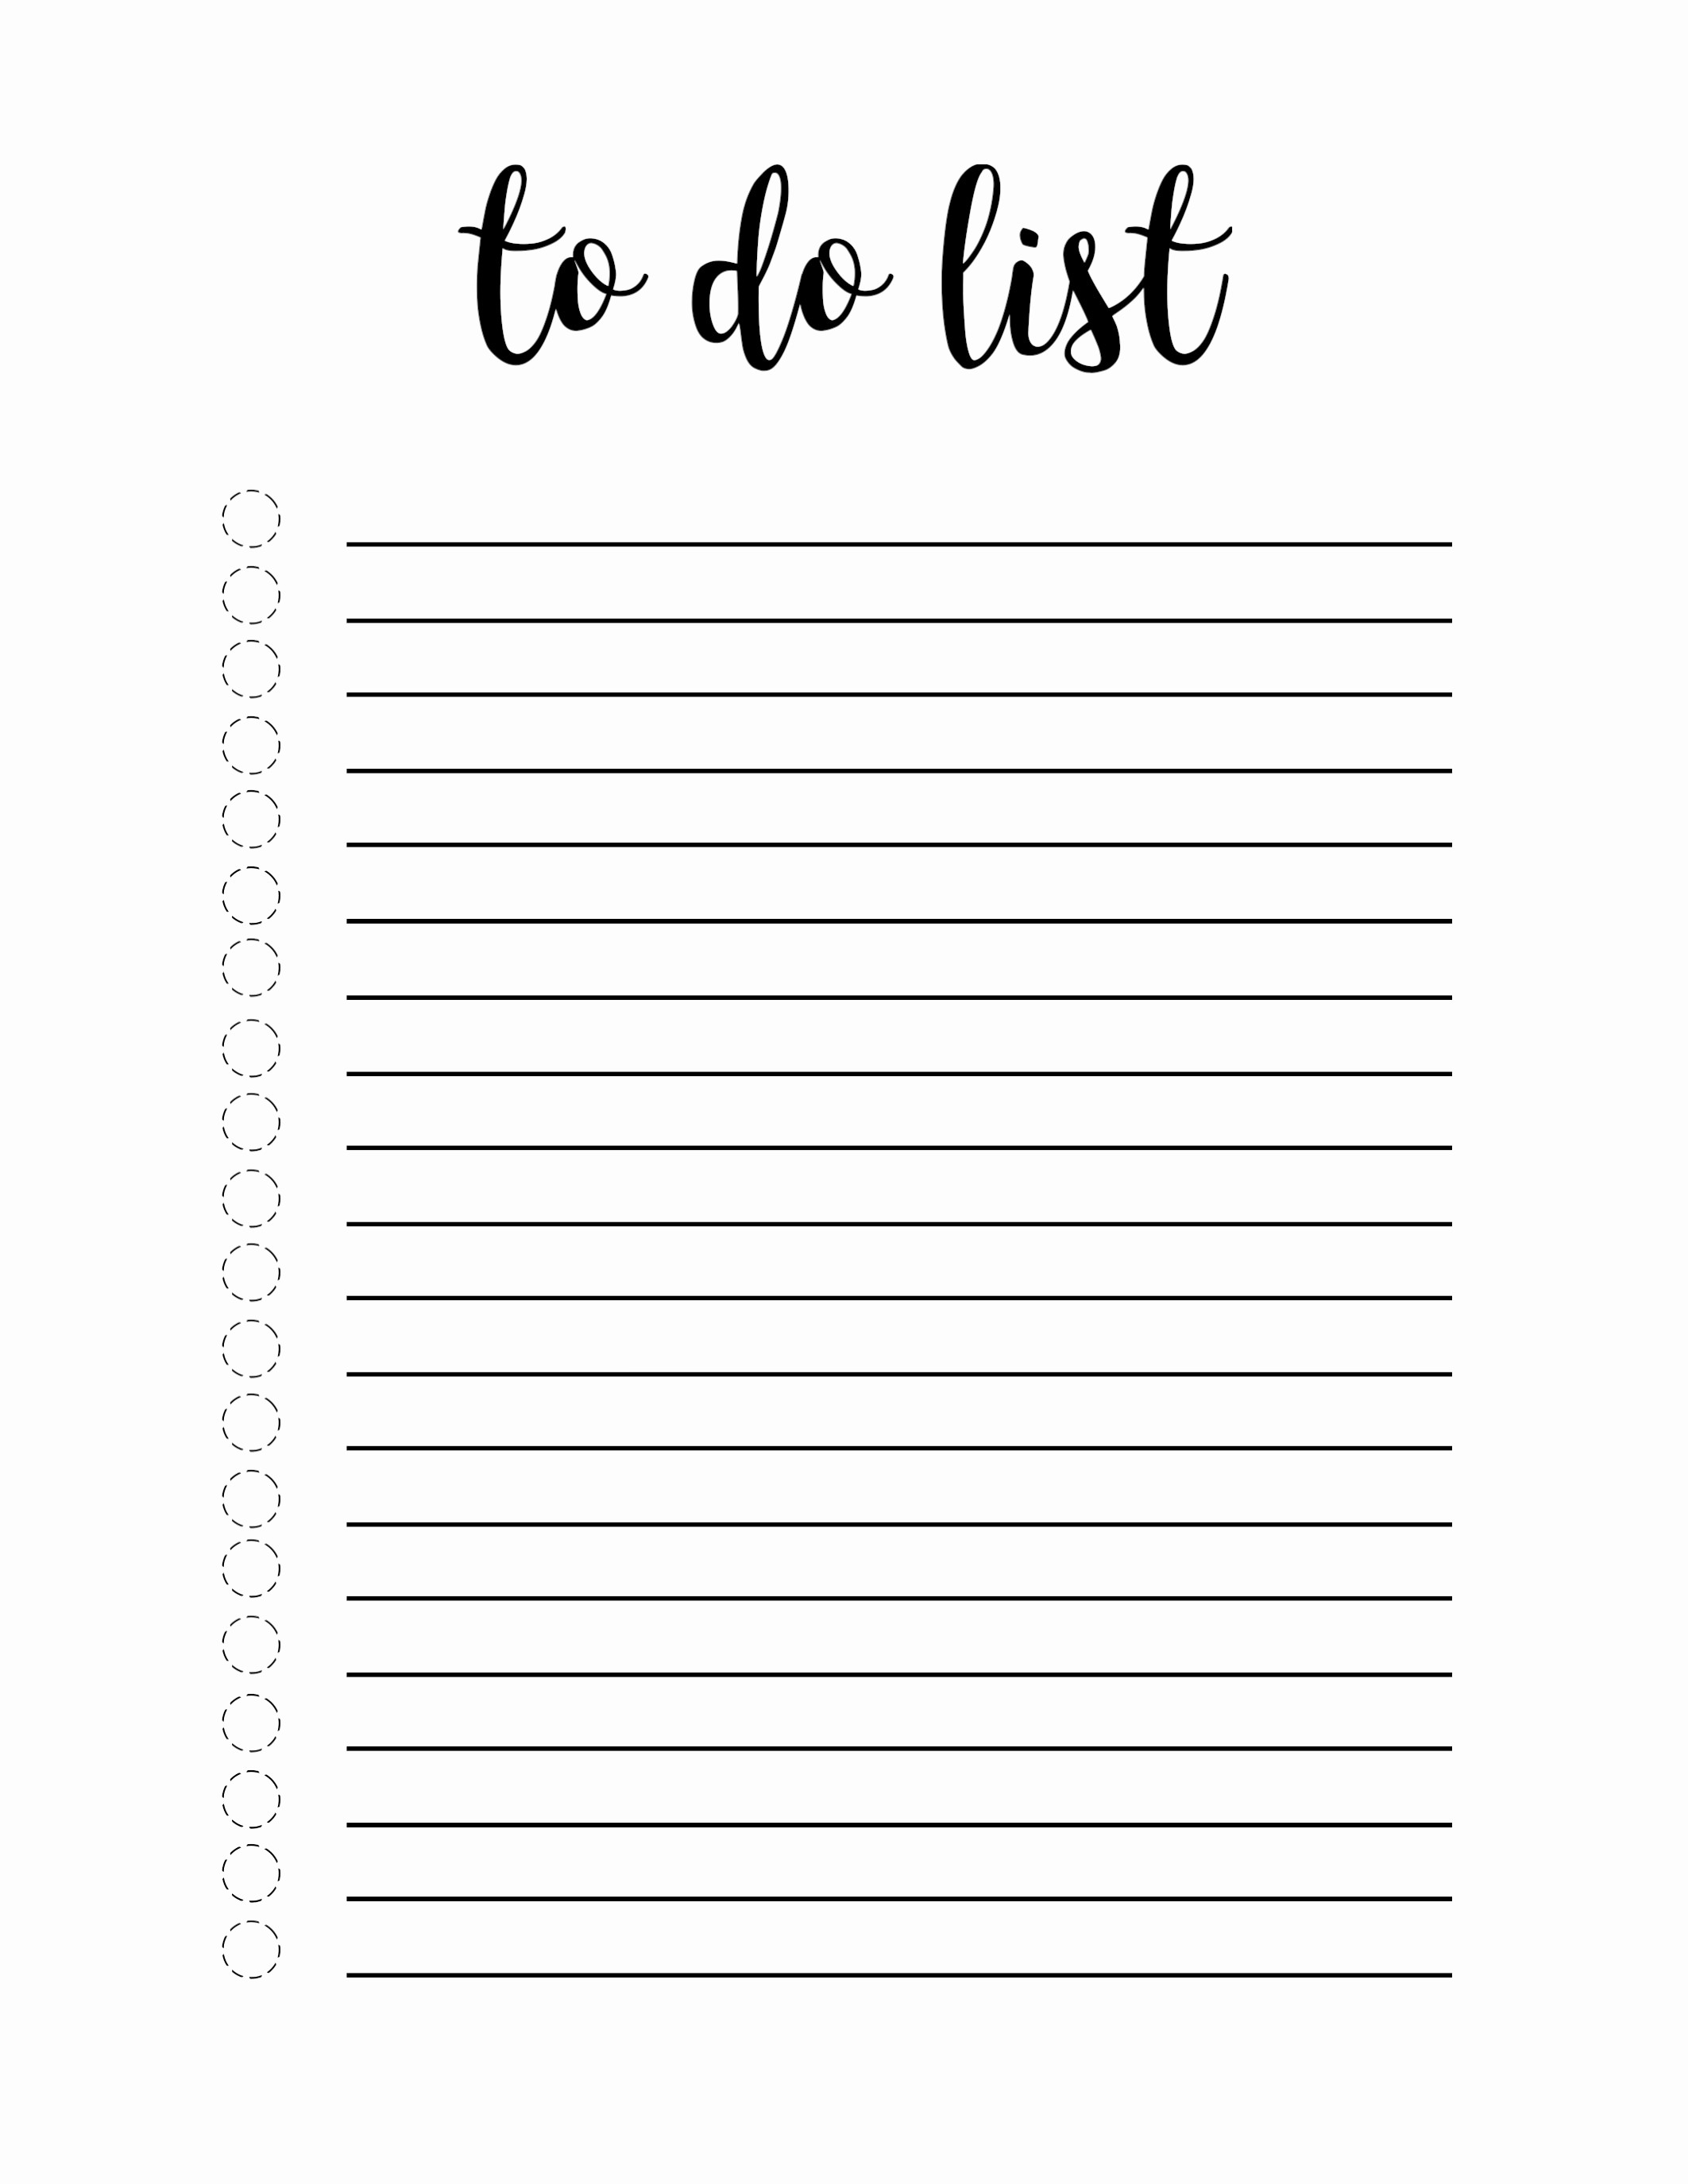 Task to Do List Template Lovely Free Printable to Do List Template Paper Trail Design